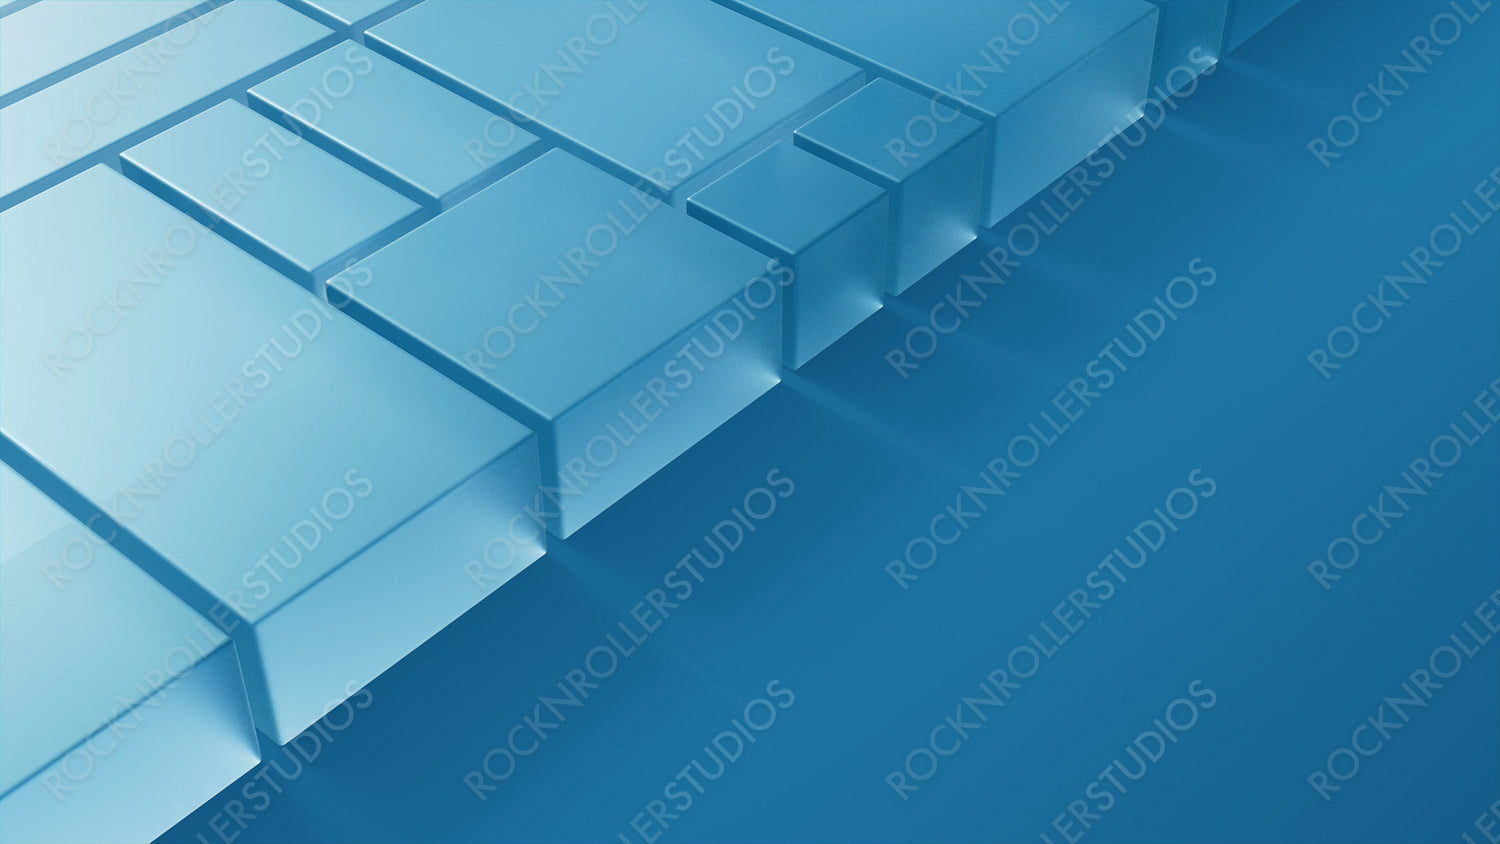 Frosted Glass Shapes on a Blue Surface. Innovative Tech Design with space for text. 3D Render.